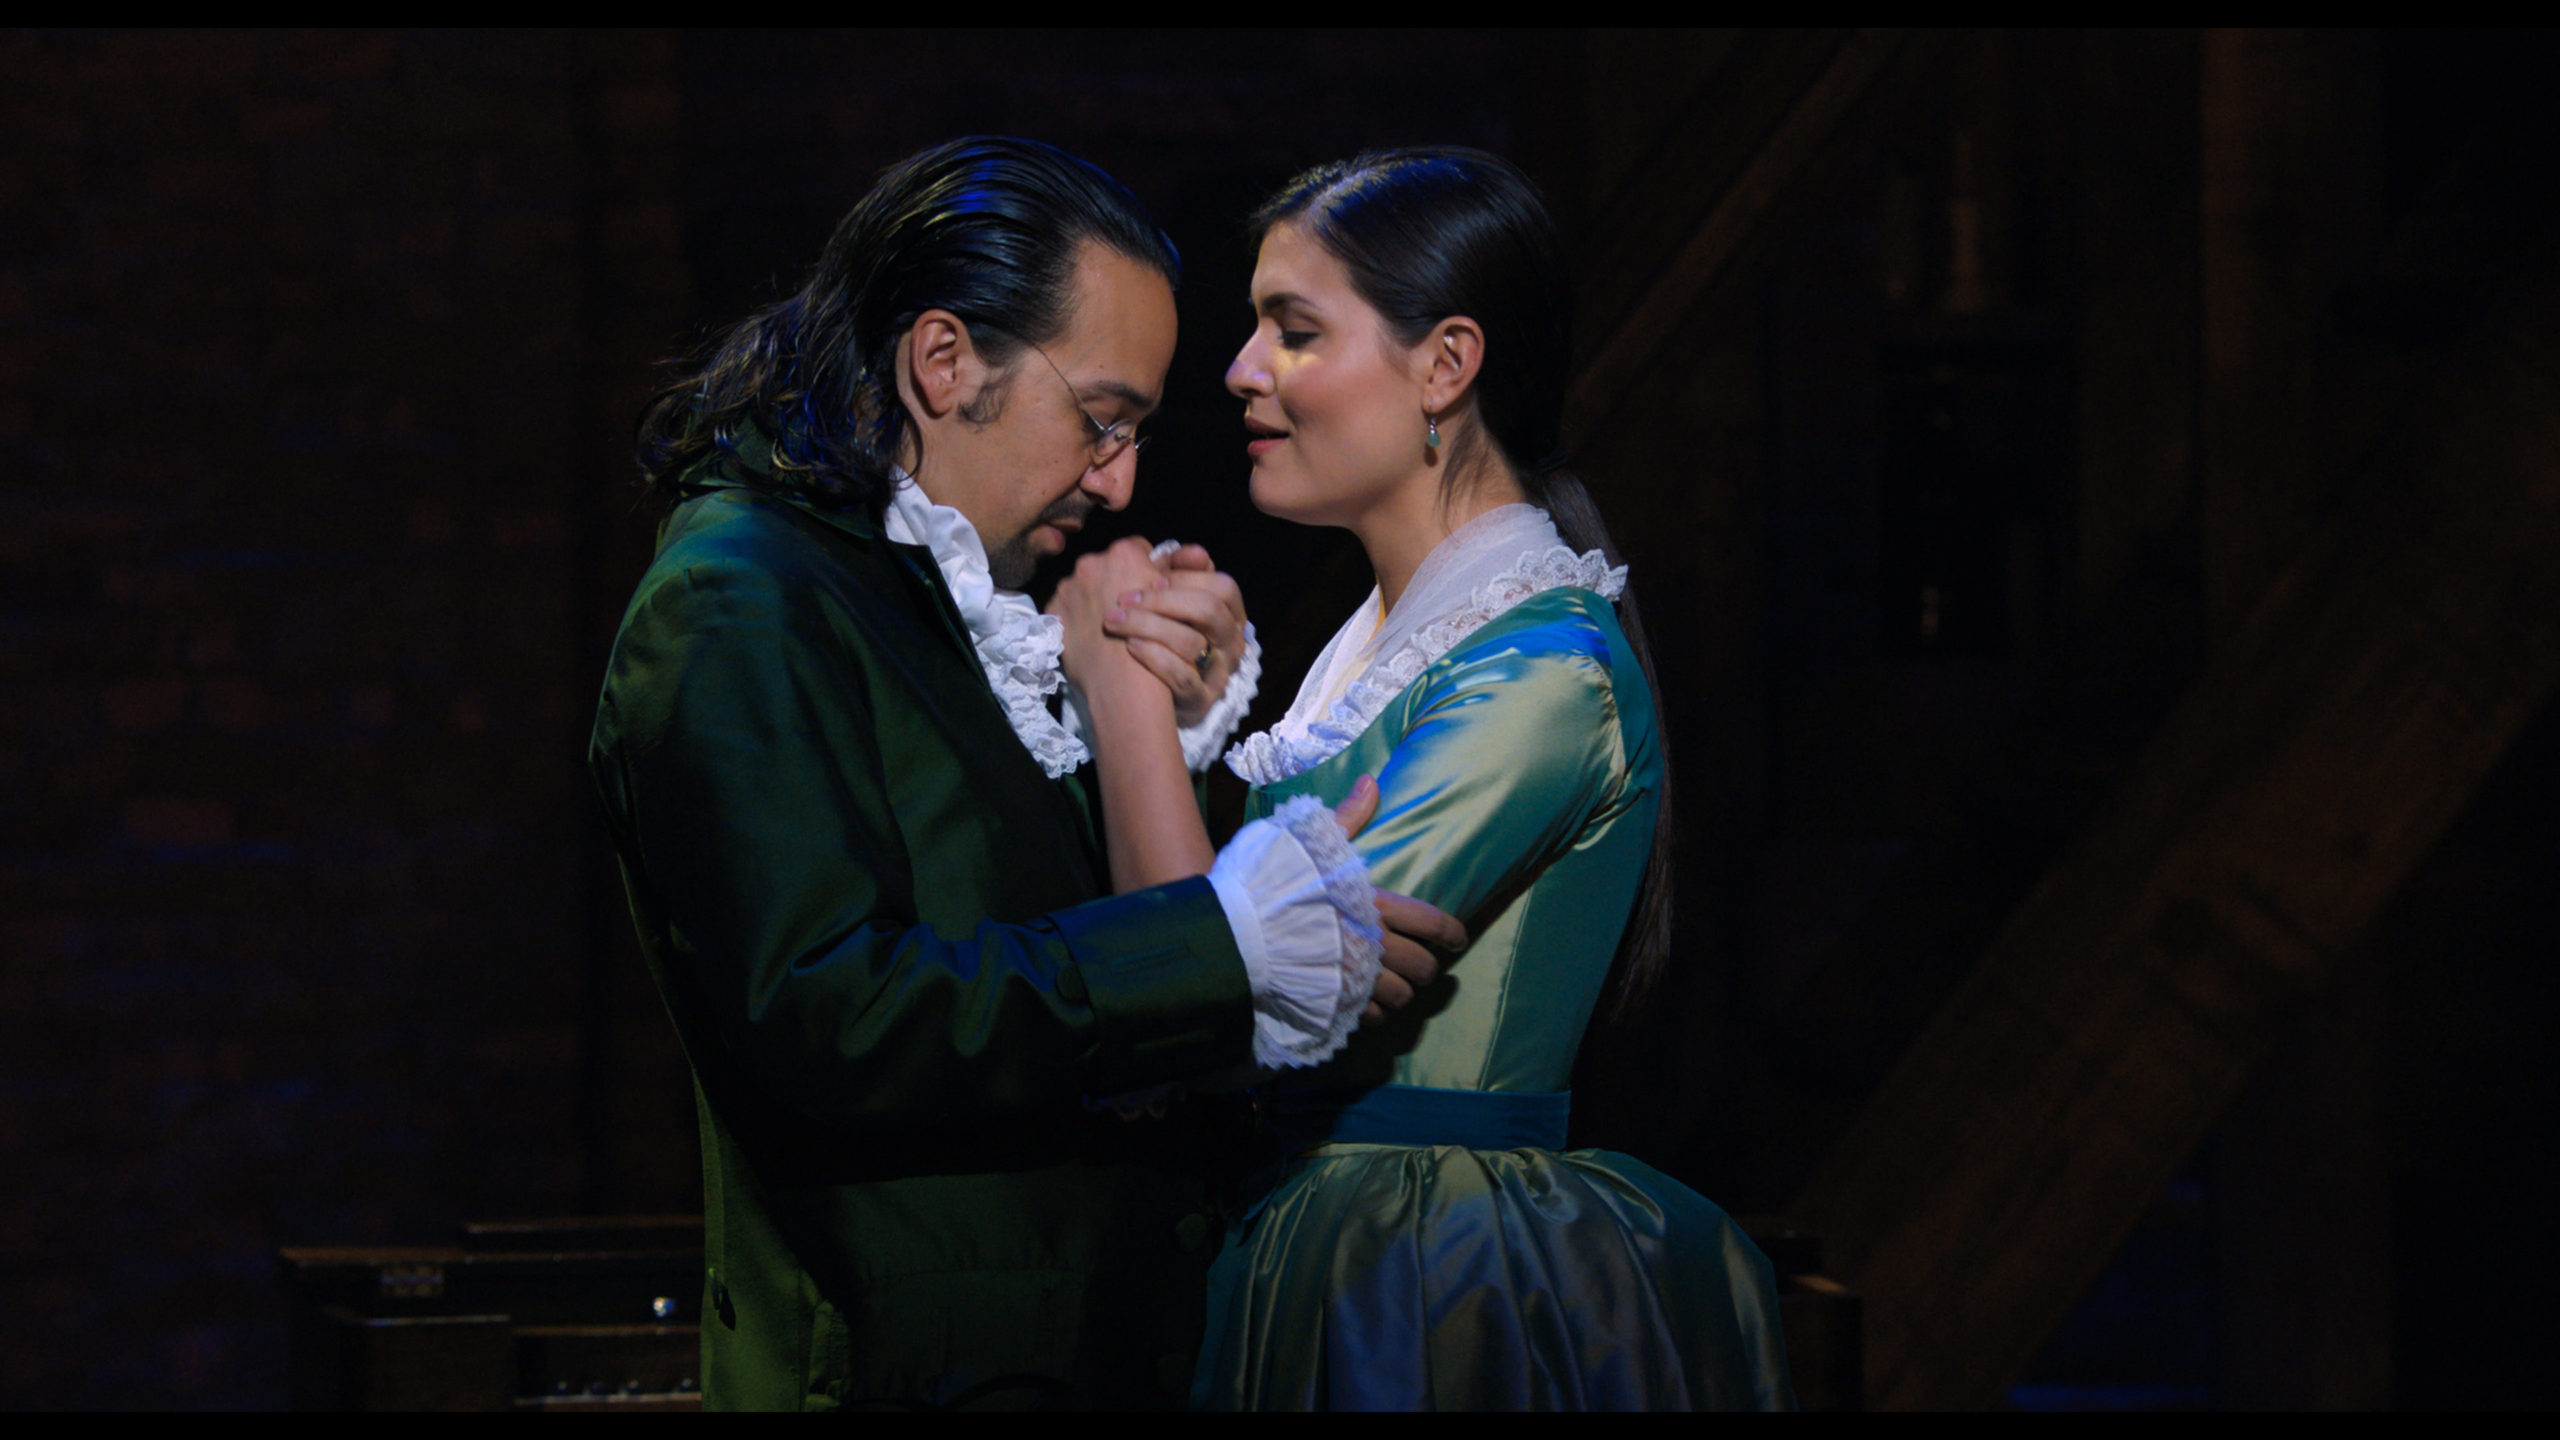 Hamilton embraces his wife, Eliza, as he asks her to marry him.